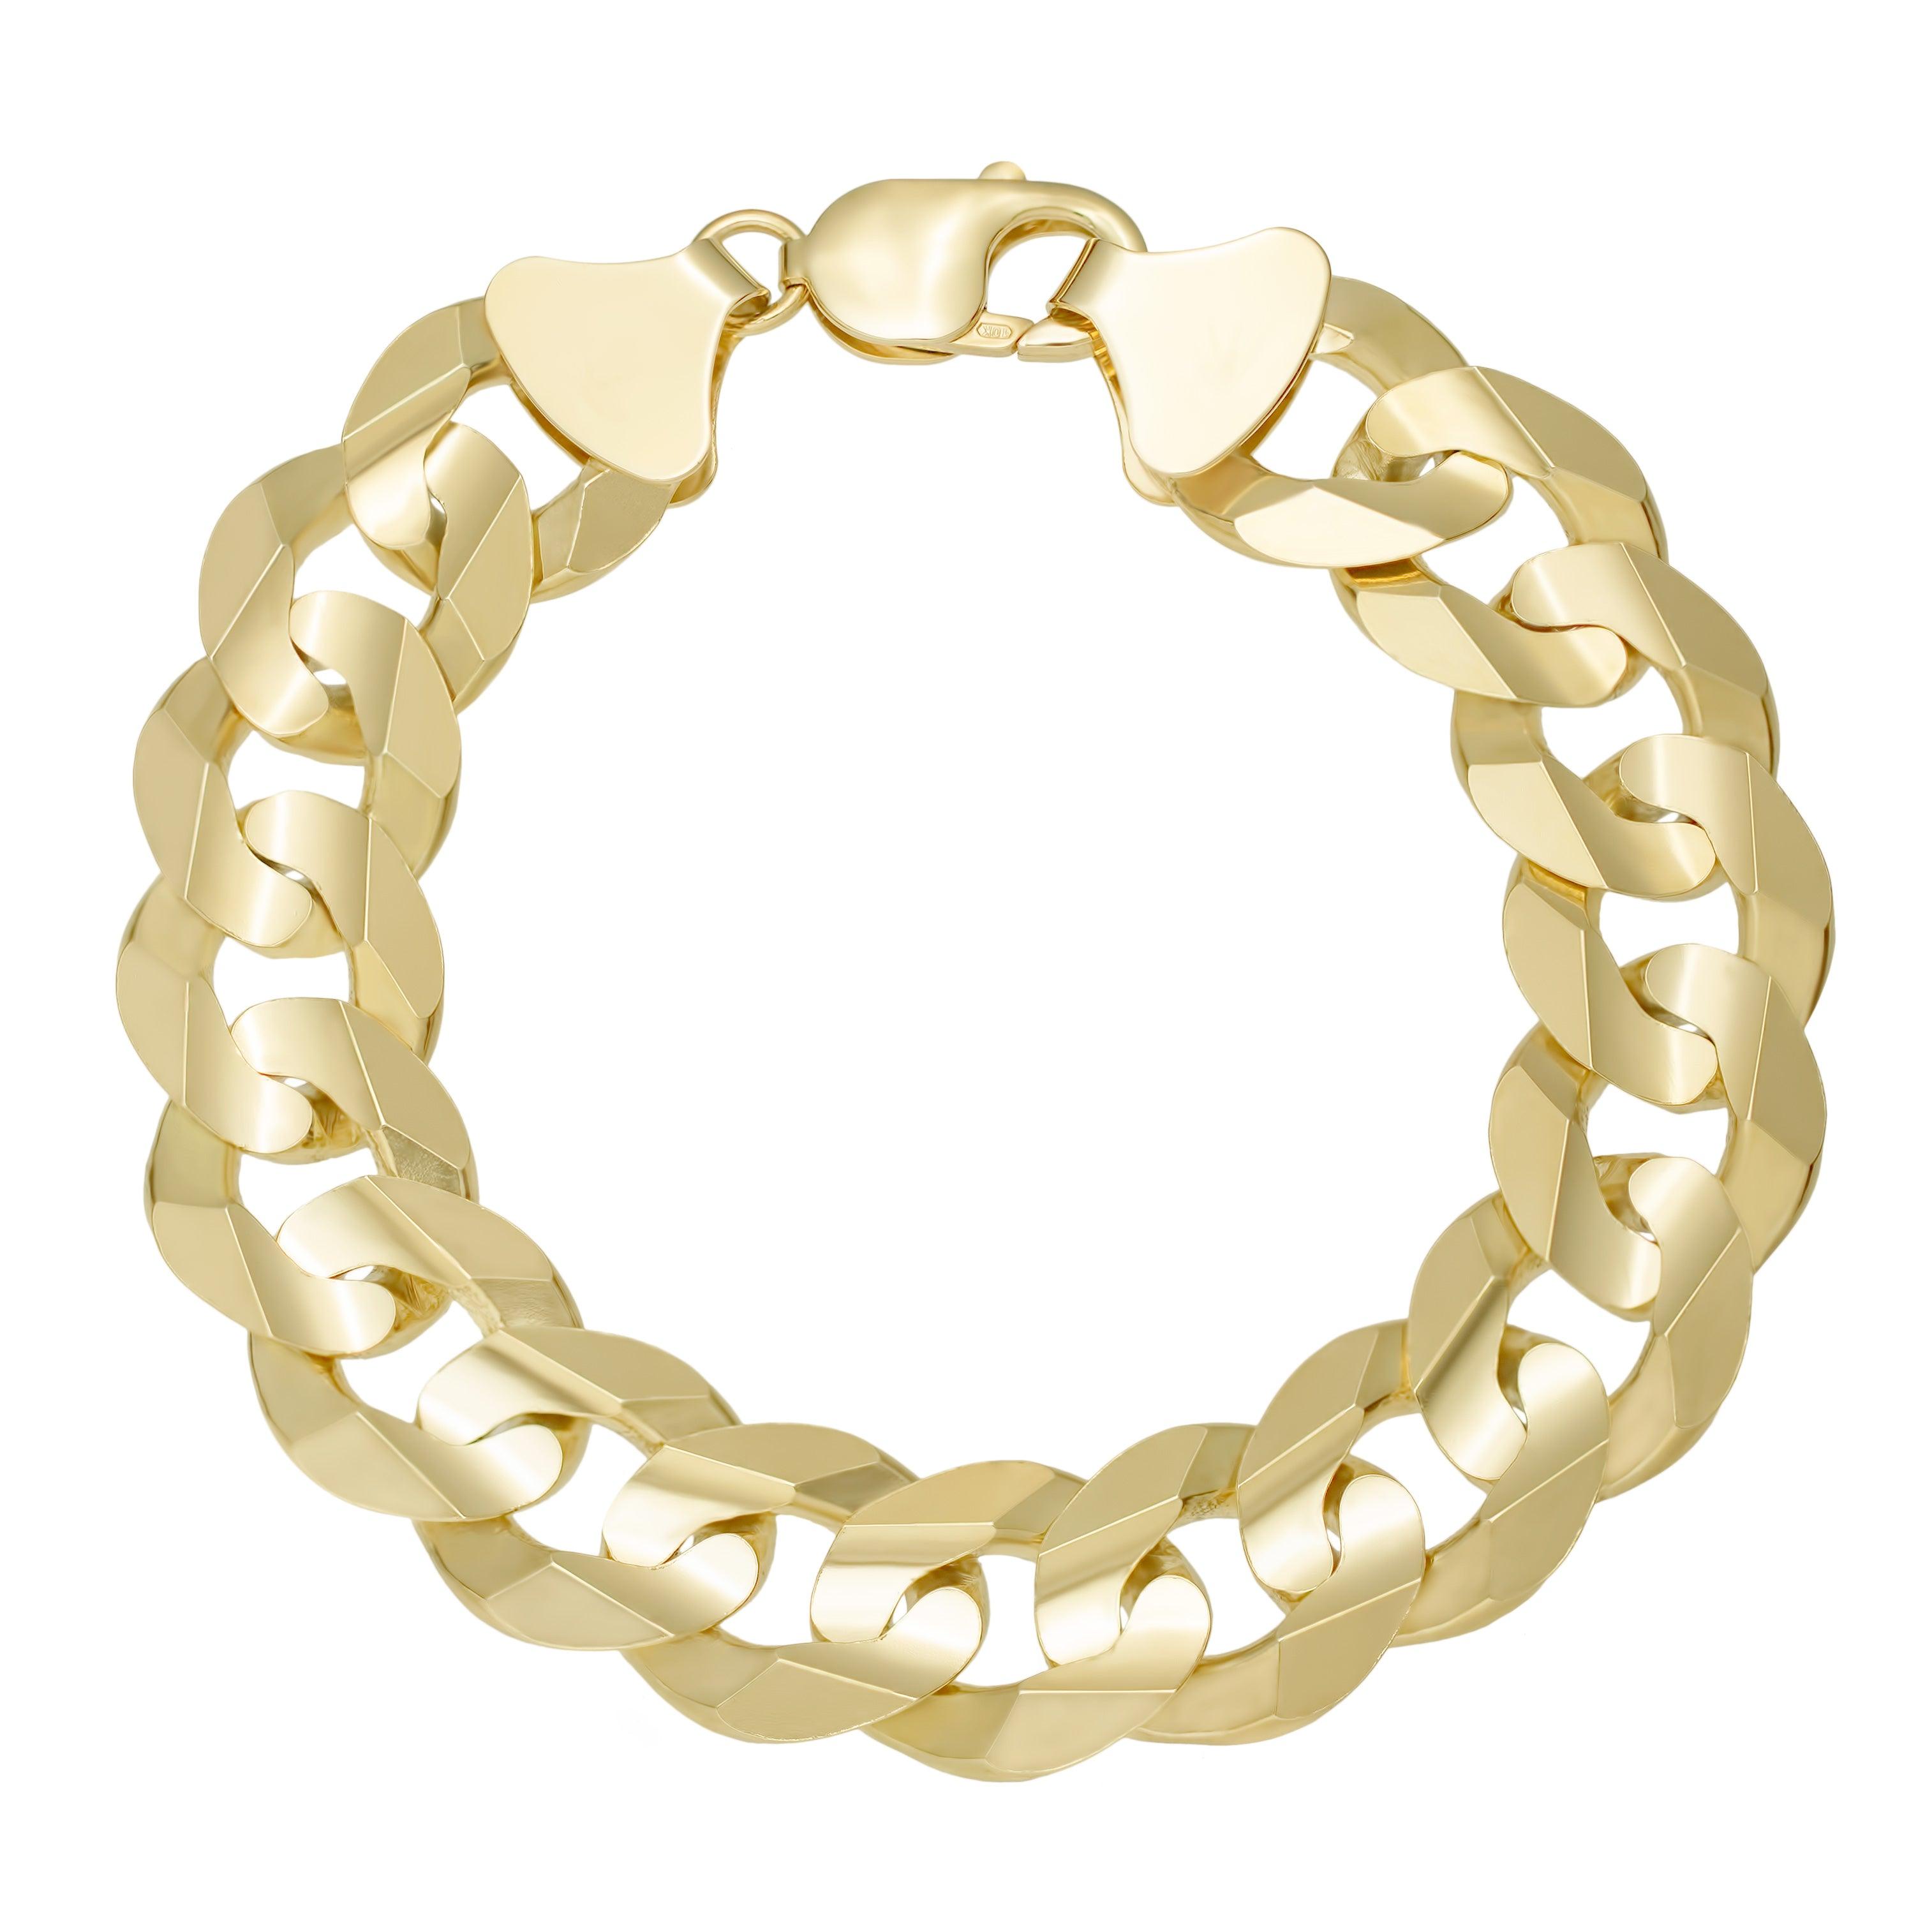 Miami Curb Link Bracelet 10K Yellow Gold - Solid